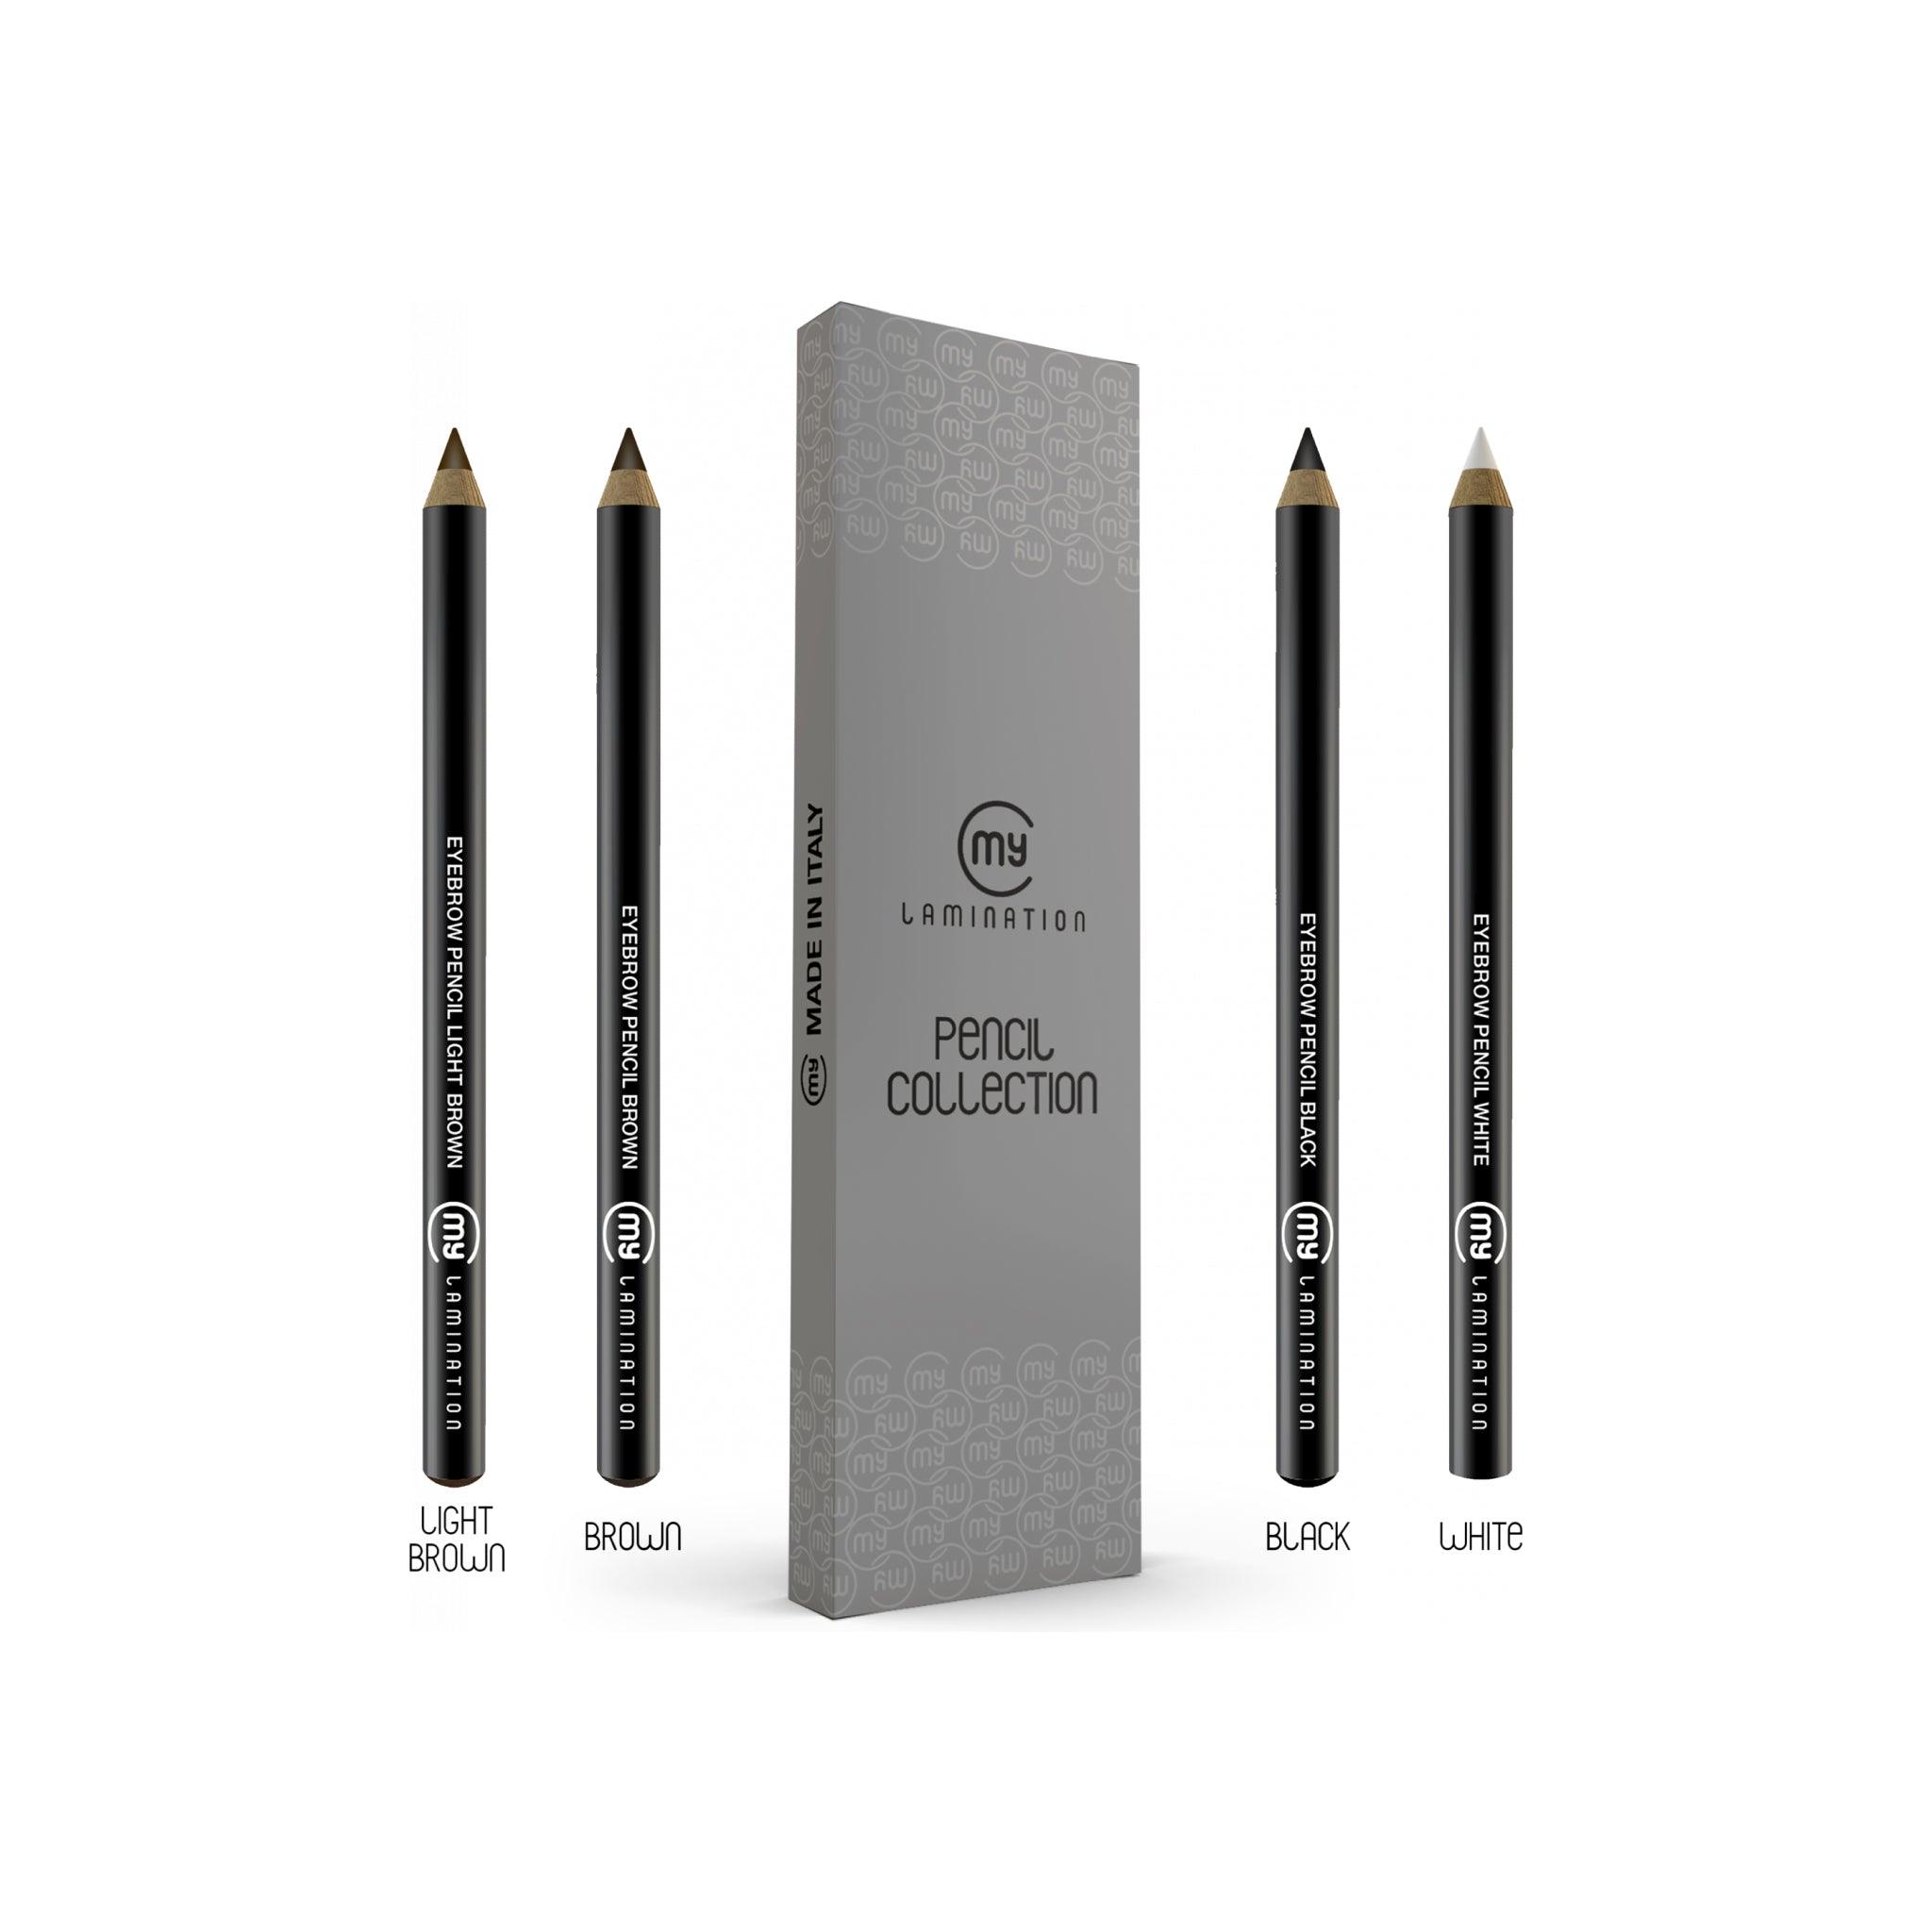 My Lamination Eyebrow Pencil Collection Set of 4